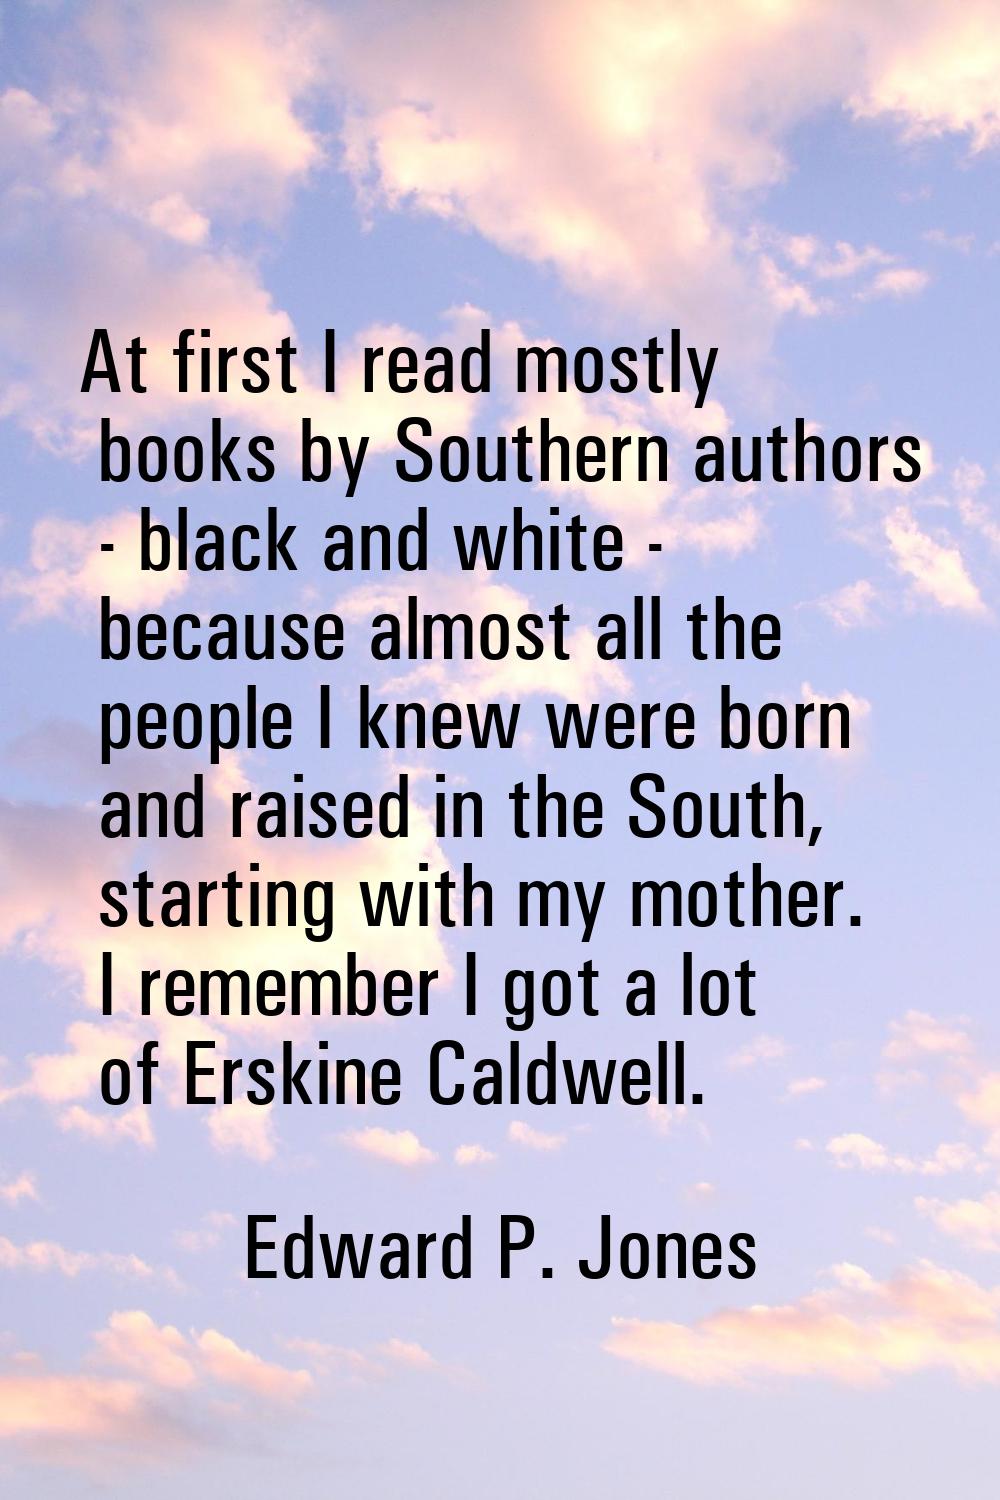 At first I read mostly books by Southern authors - black and white - because almost all the people 